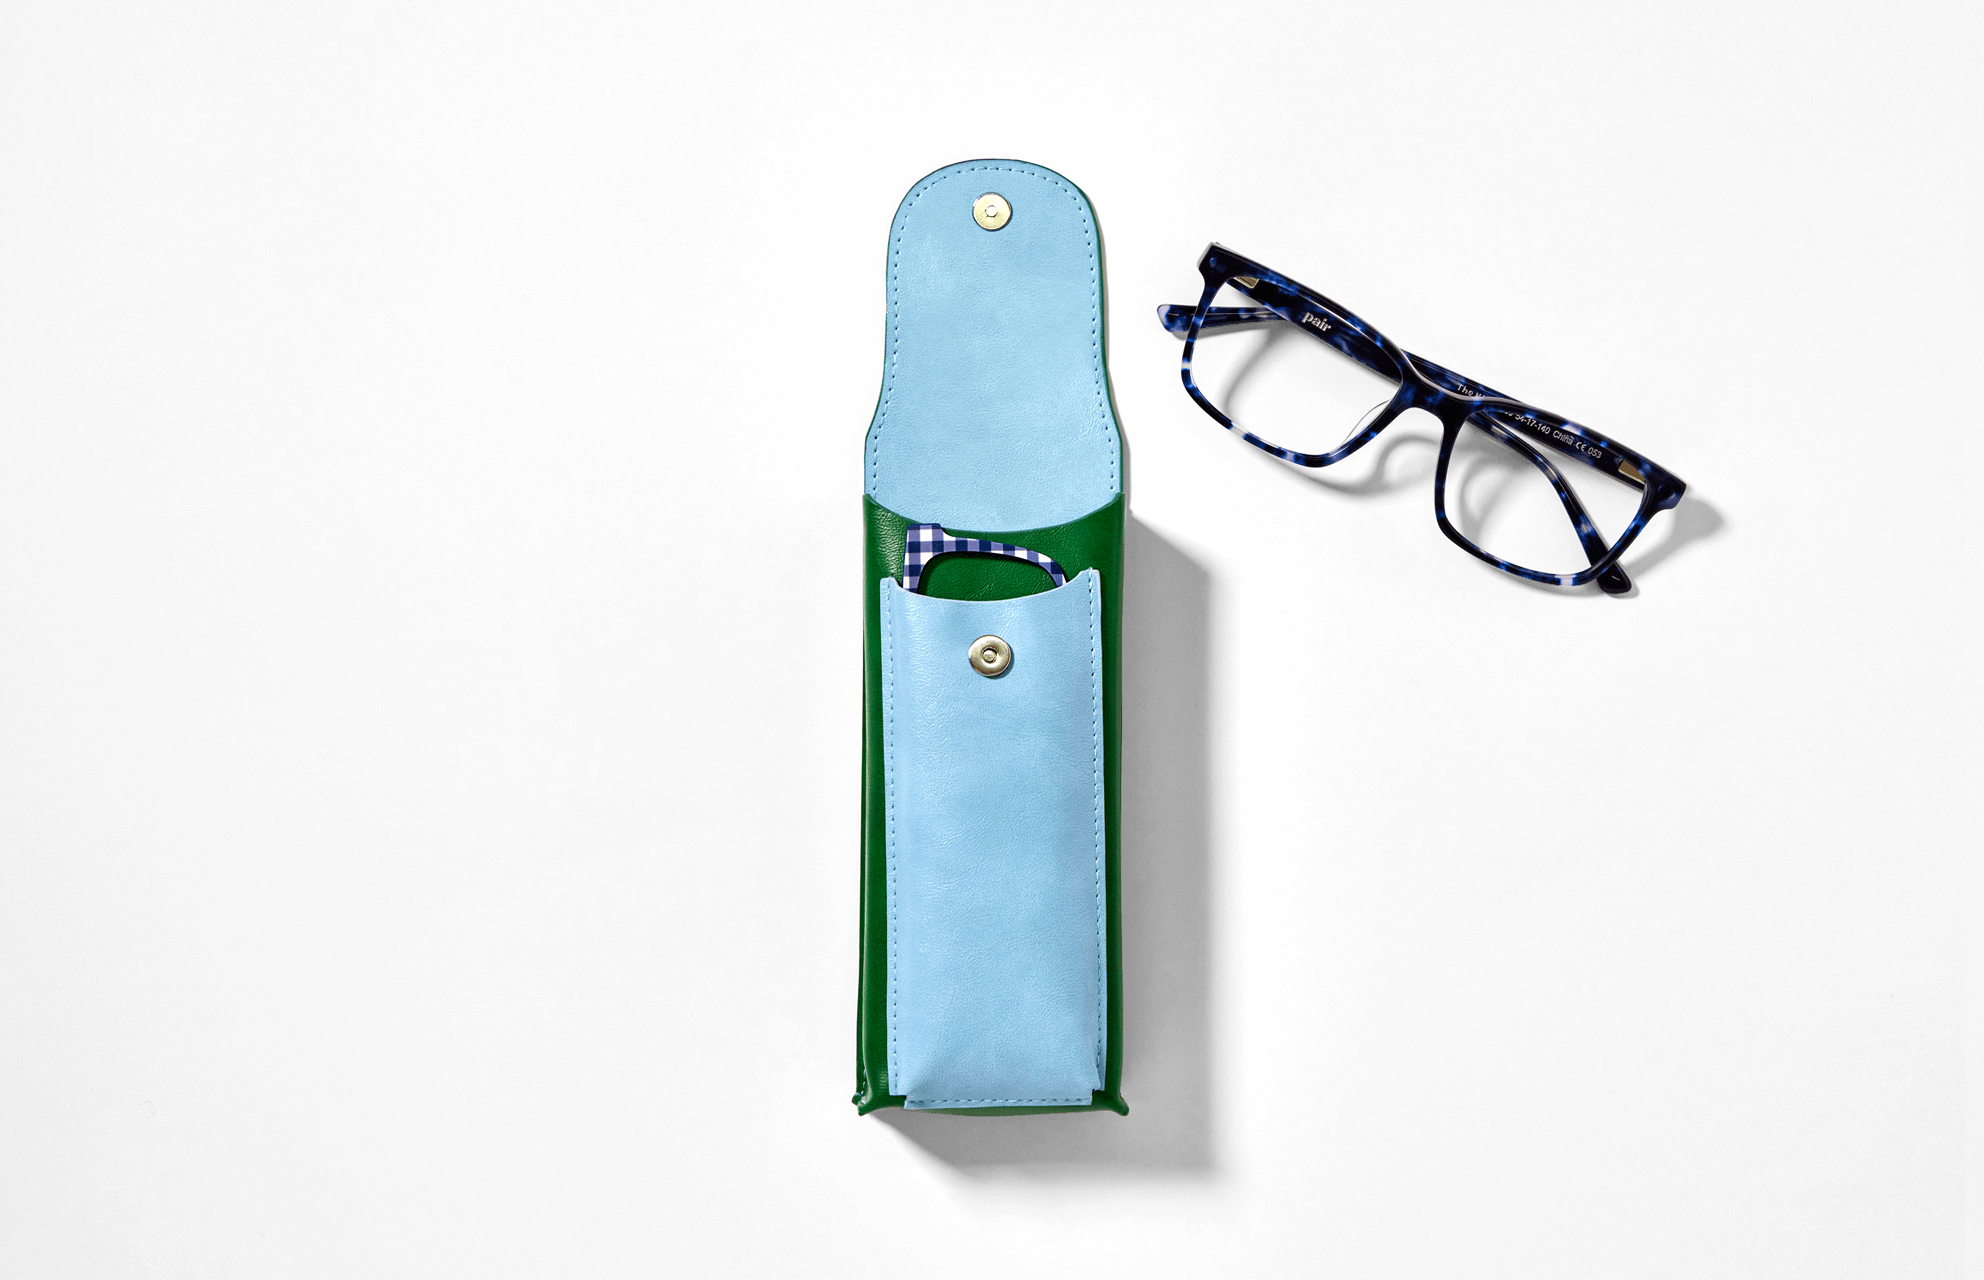 https://cdn.shopify.com/s/files/1/1147/9910/files/carousel-image-1_glasses-case_accessories_fef8a67f-8d8b-4f80-ab09-41ccfe0f7829.png?v=1690404928